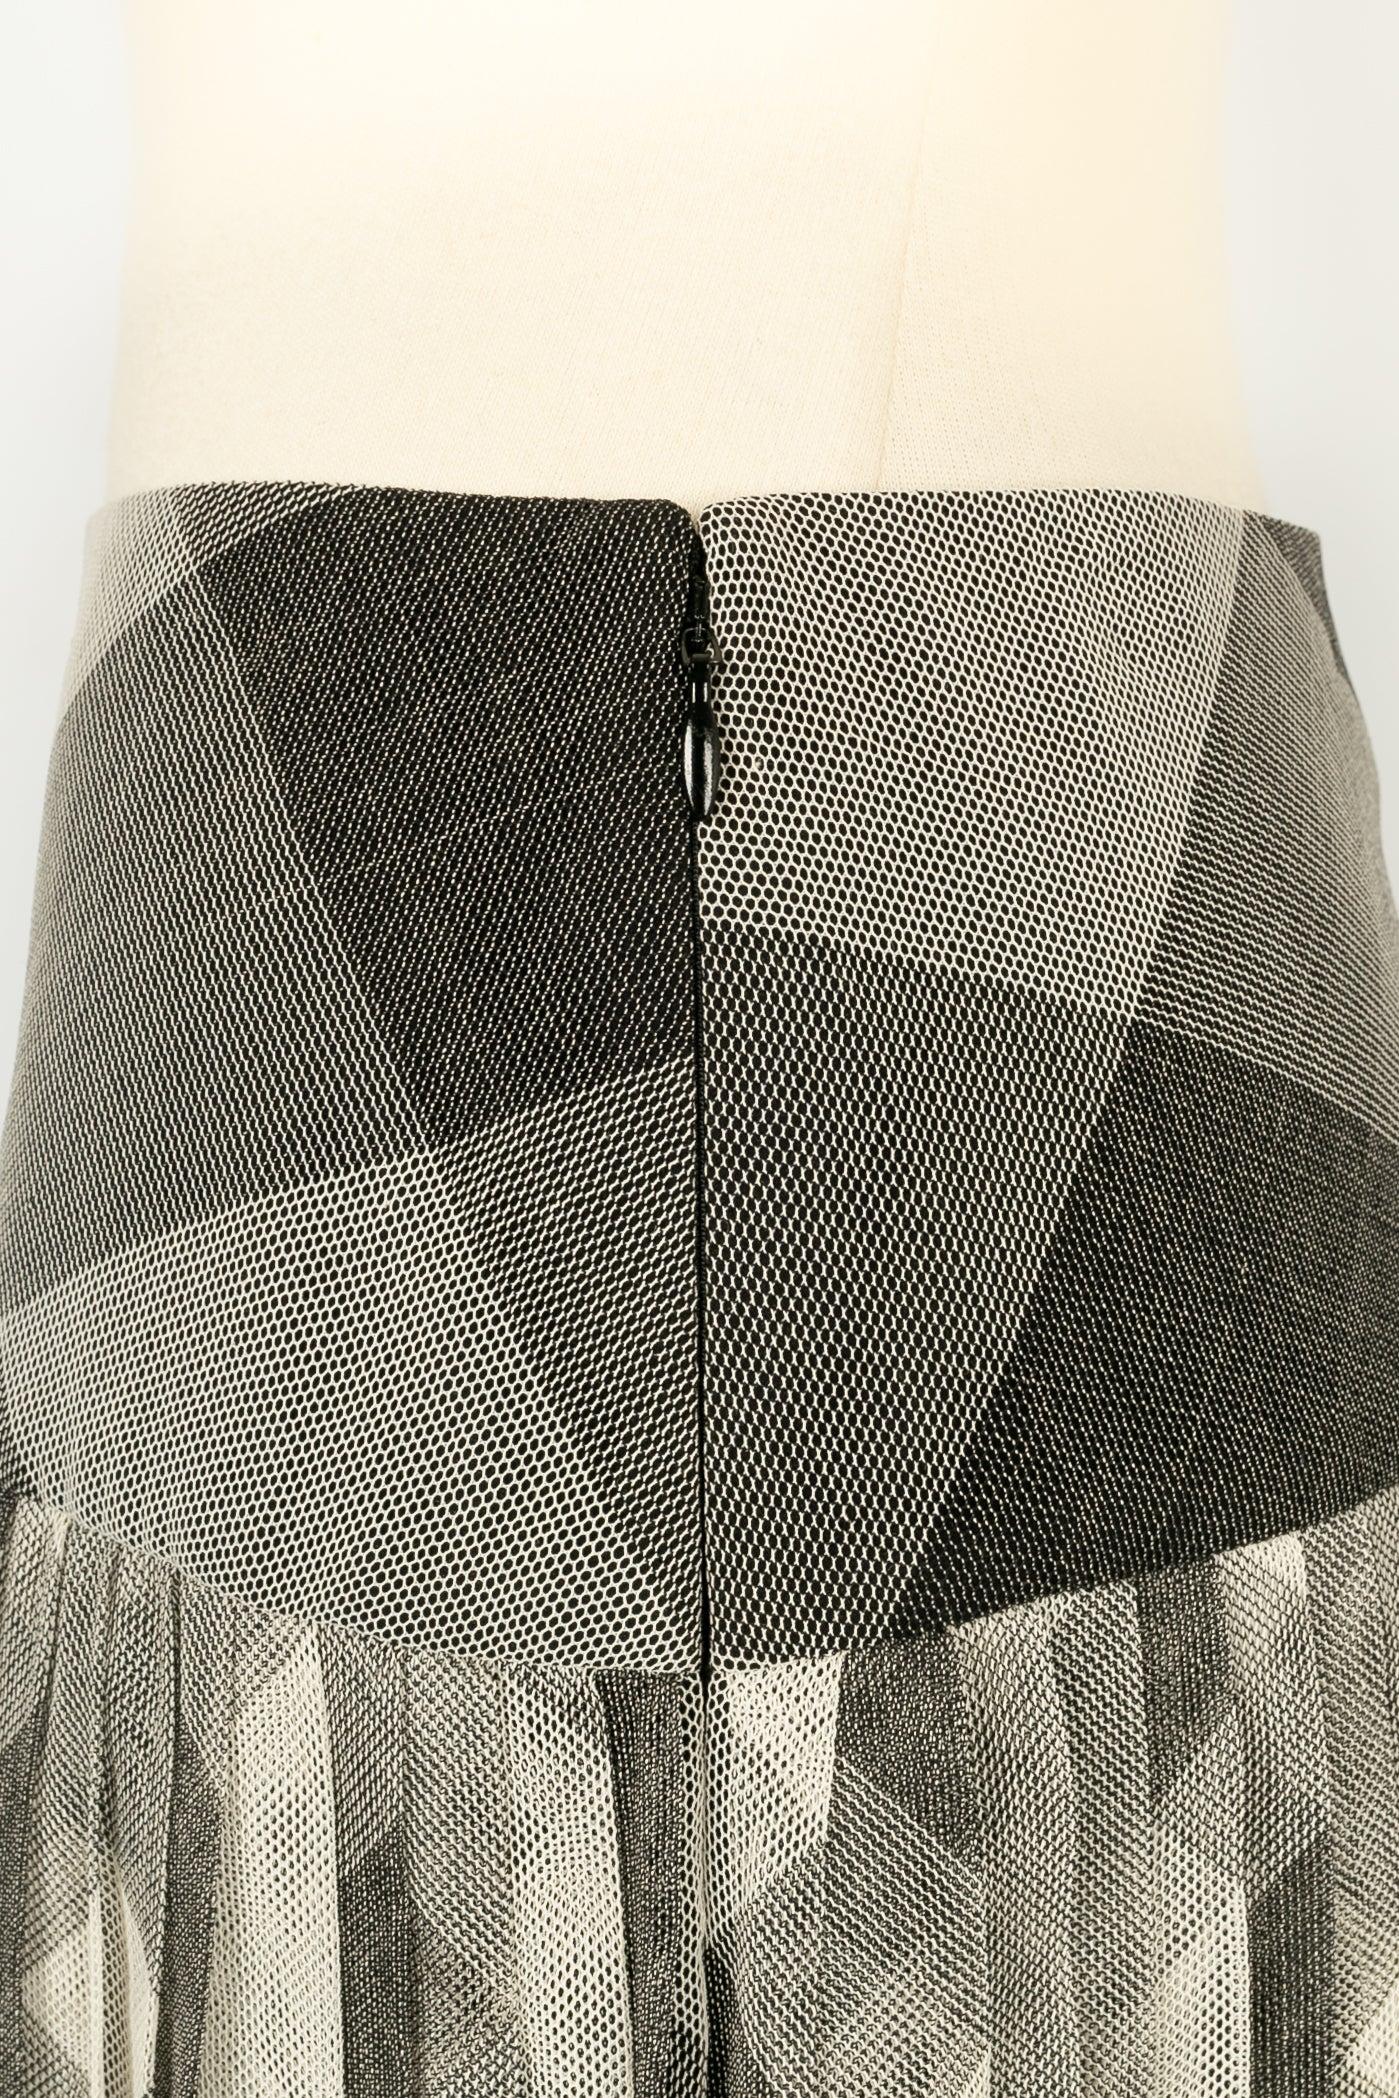 Women's Dior Skirt in Grey-Tone Blended Cotton For Sale